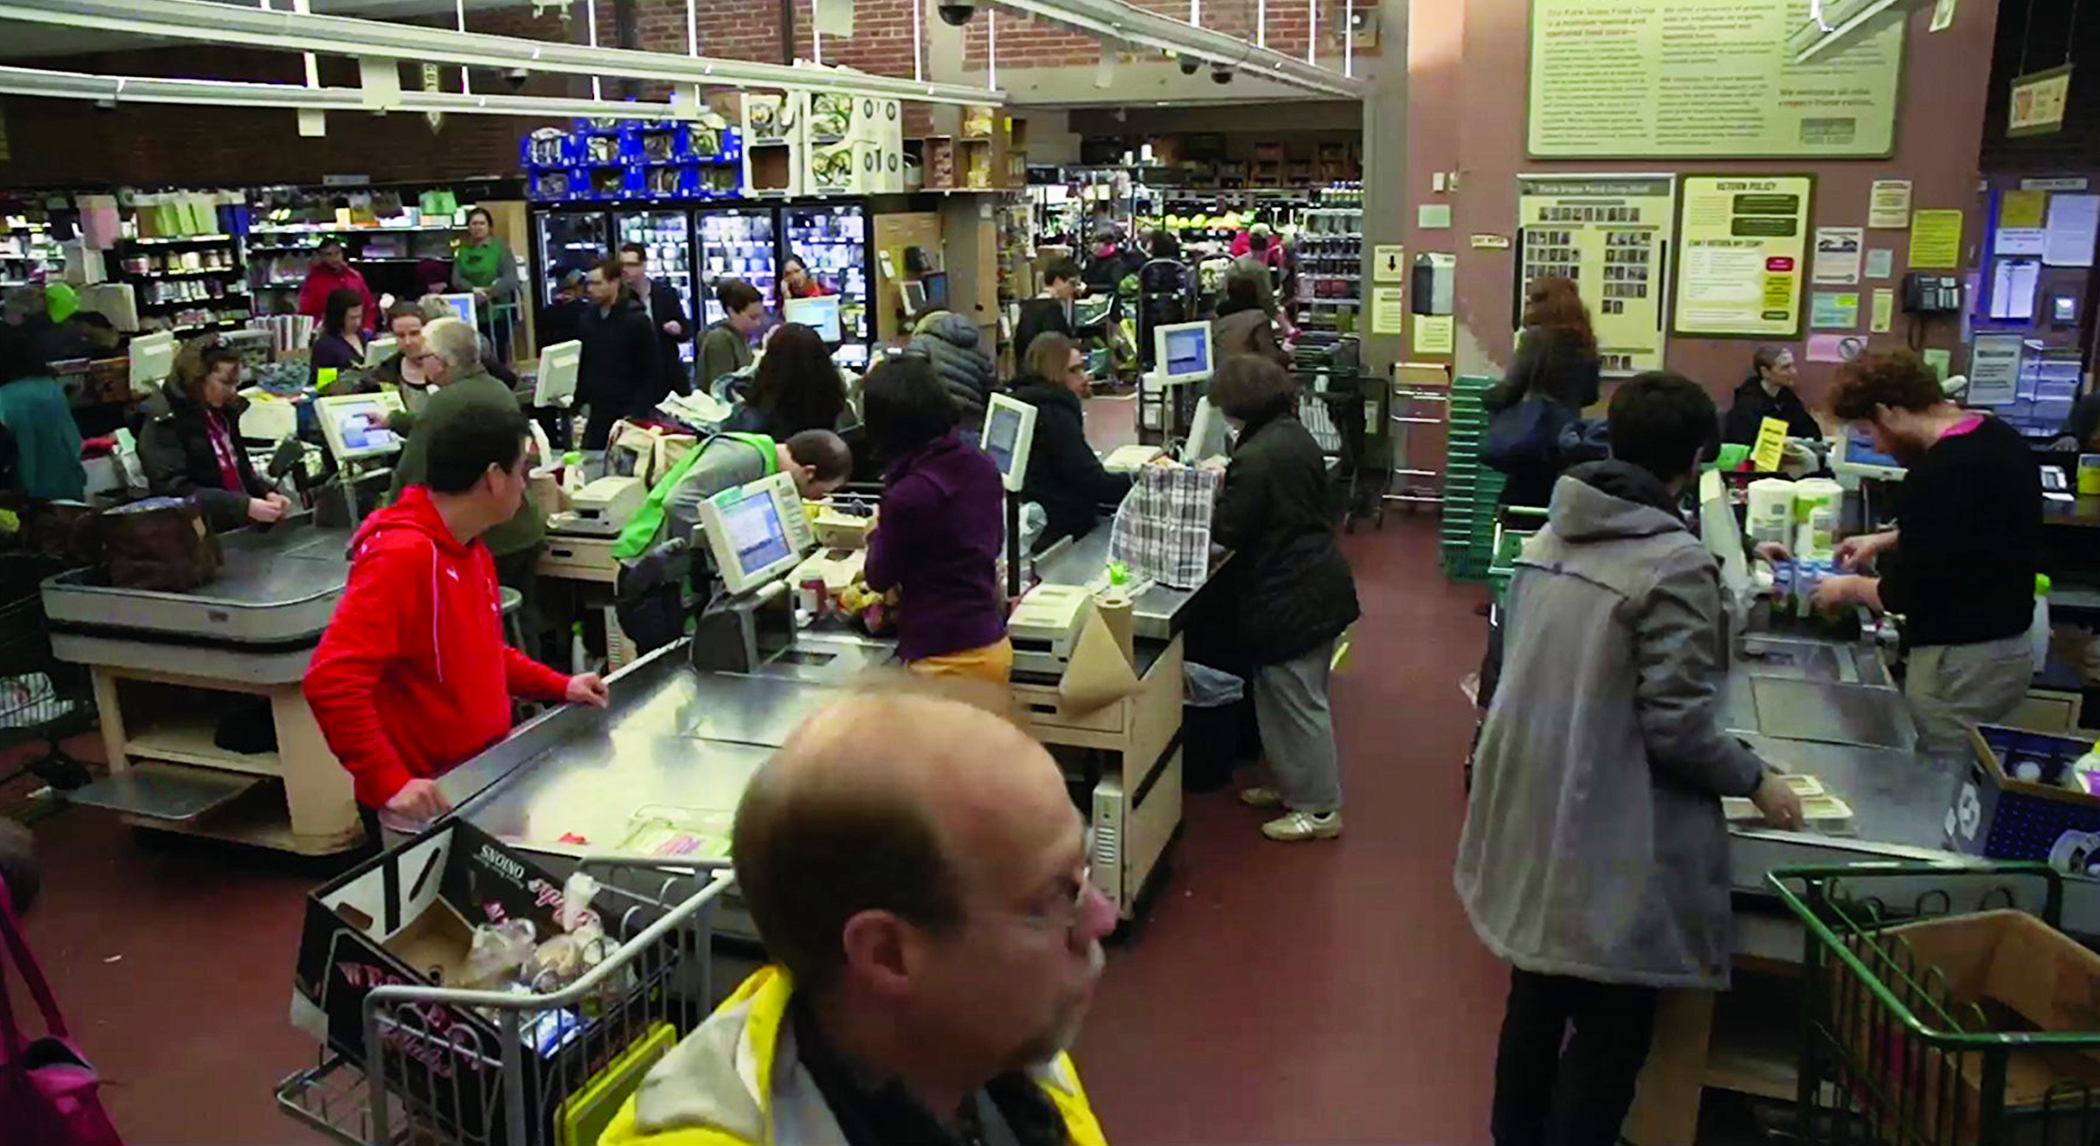 Co-op members lined up at the checkout counters.